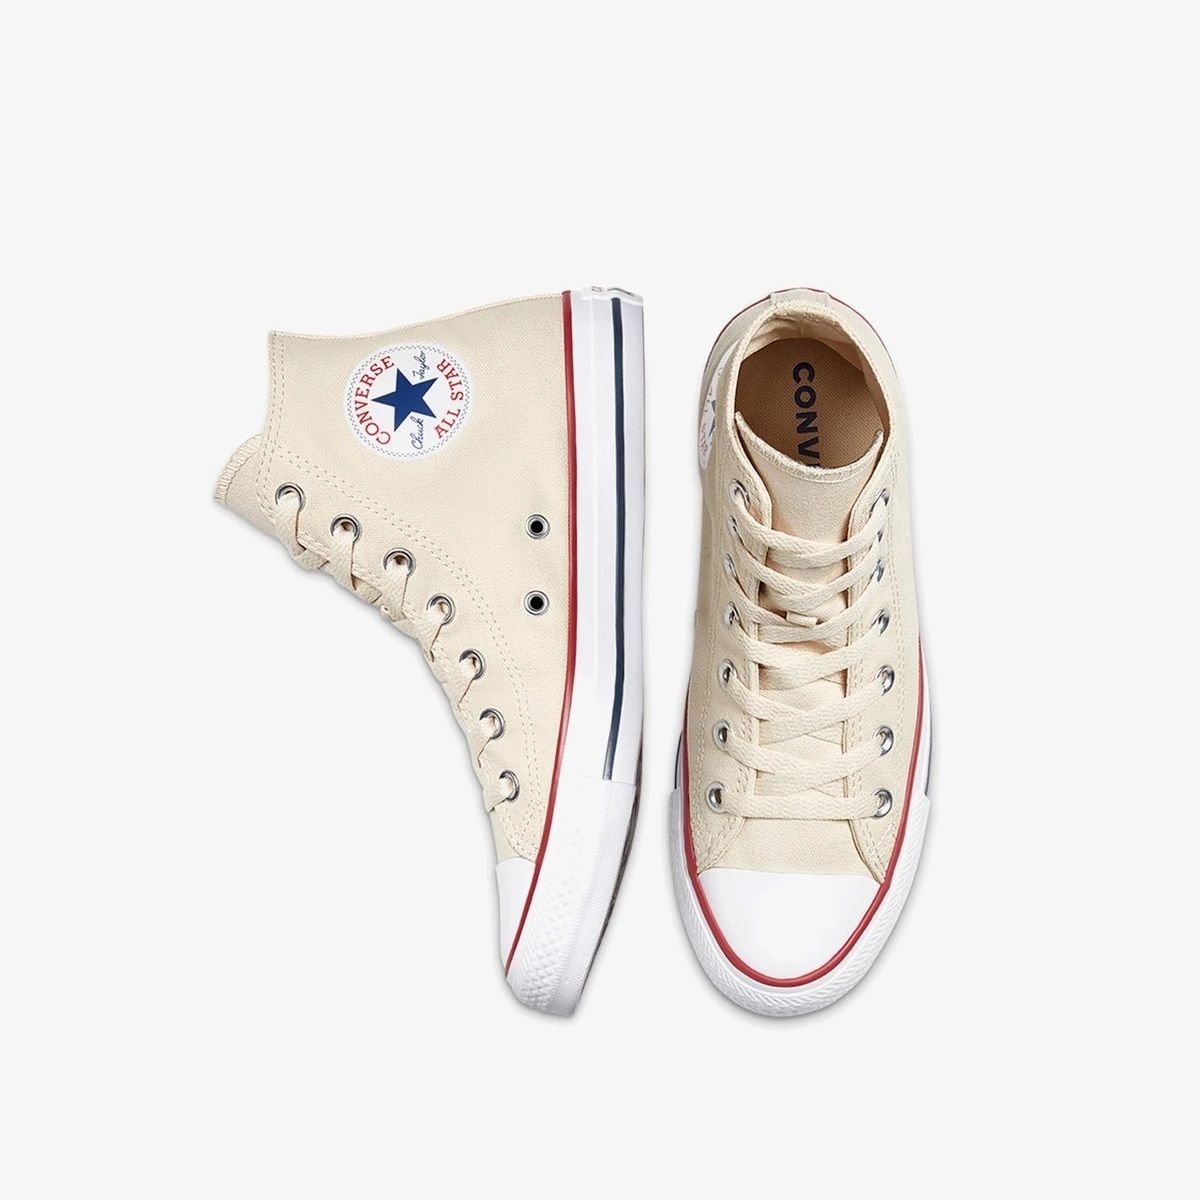  Giày Thể Thao Unisex CONVERSE Chuck Taylor All Star 159484C 